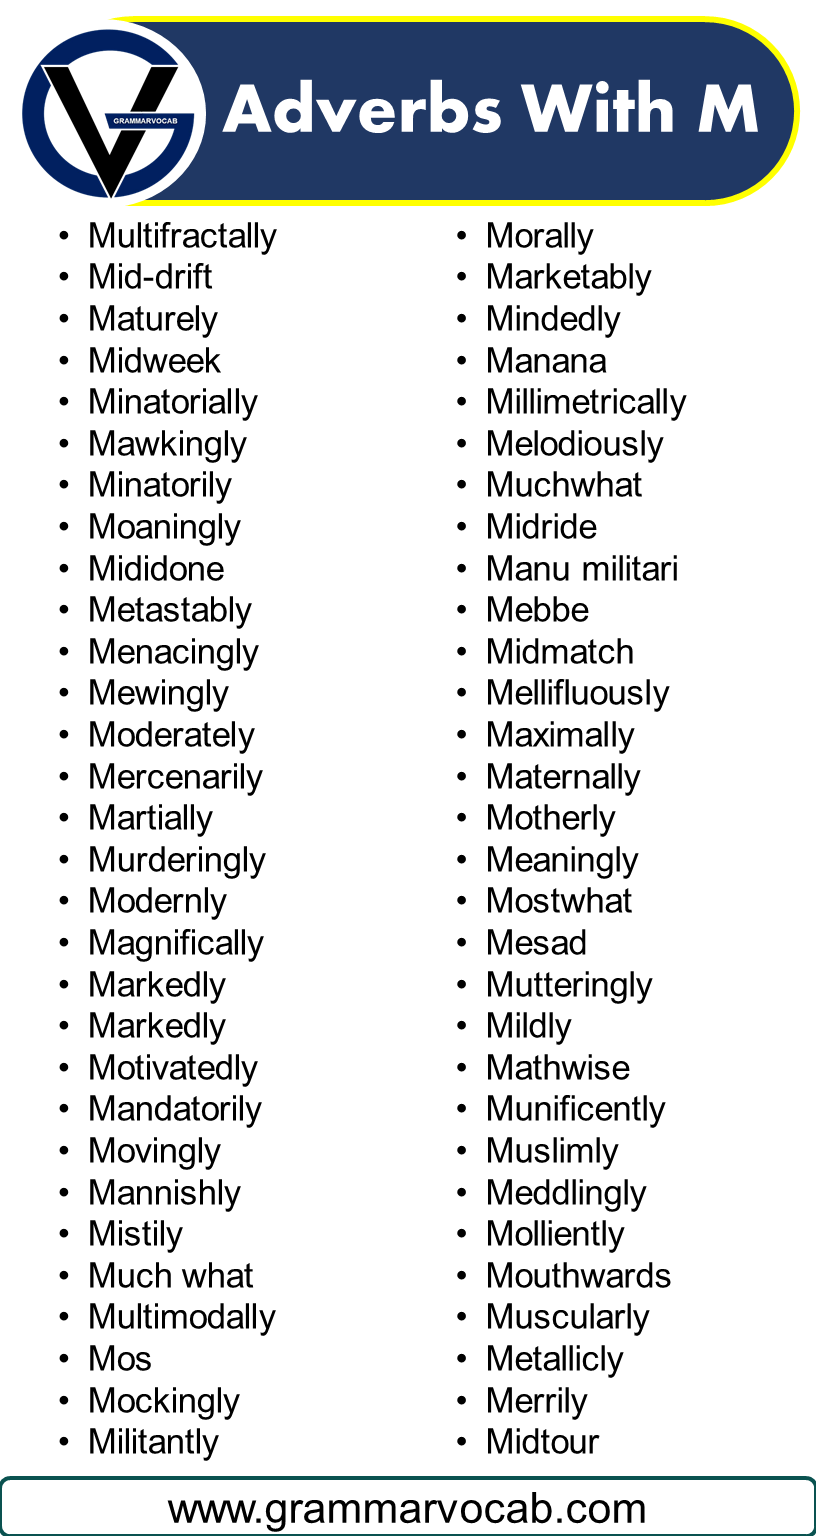 Adverbs That Start With M